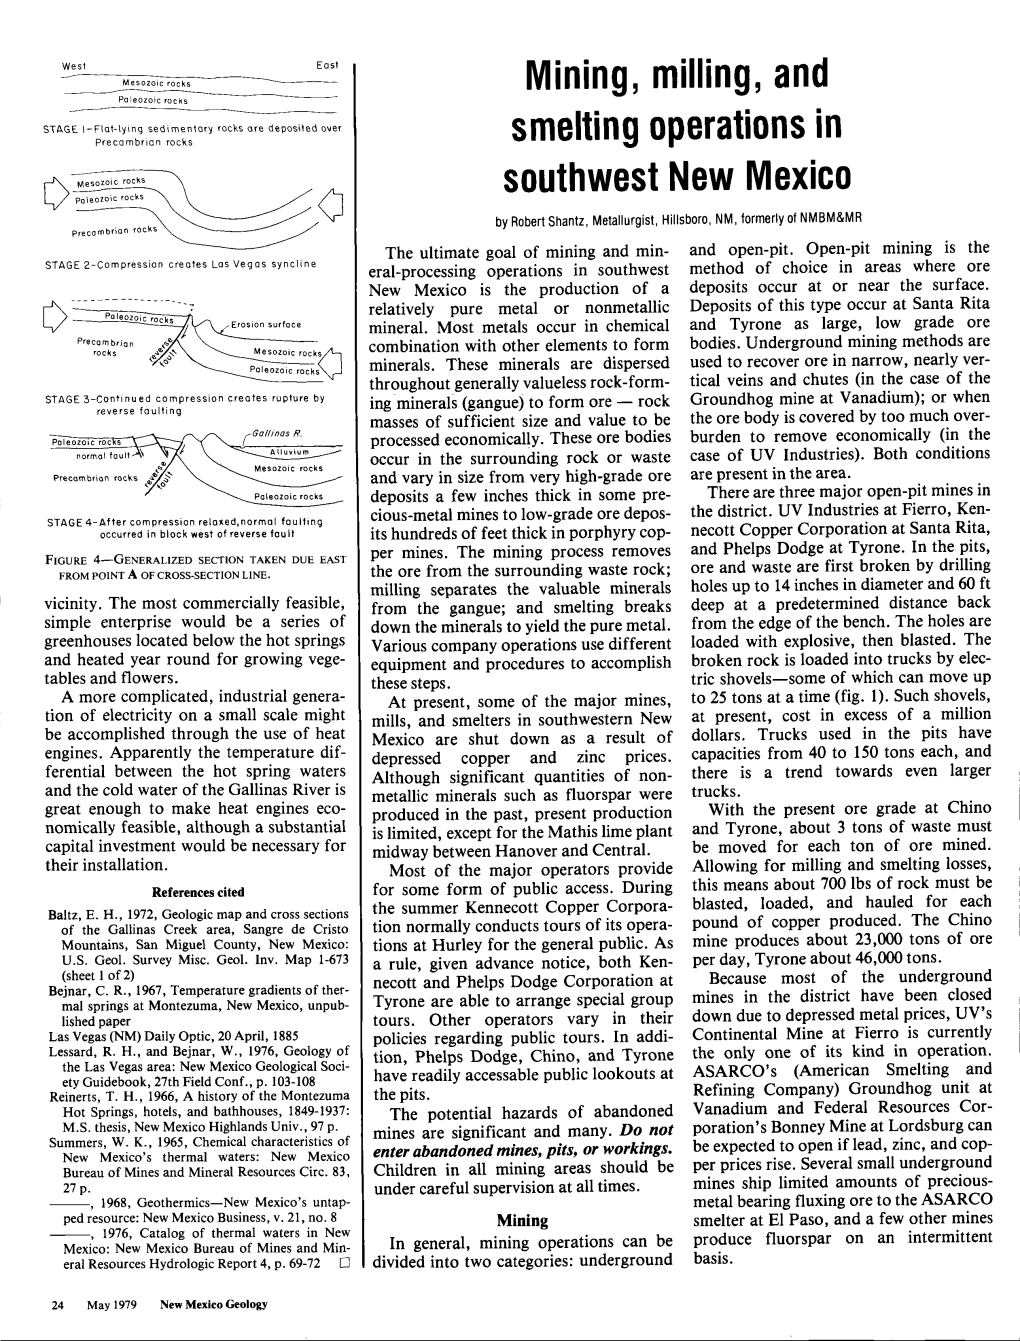 Mining, Milling, and Smelting Operations in Southwest New Mexico